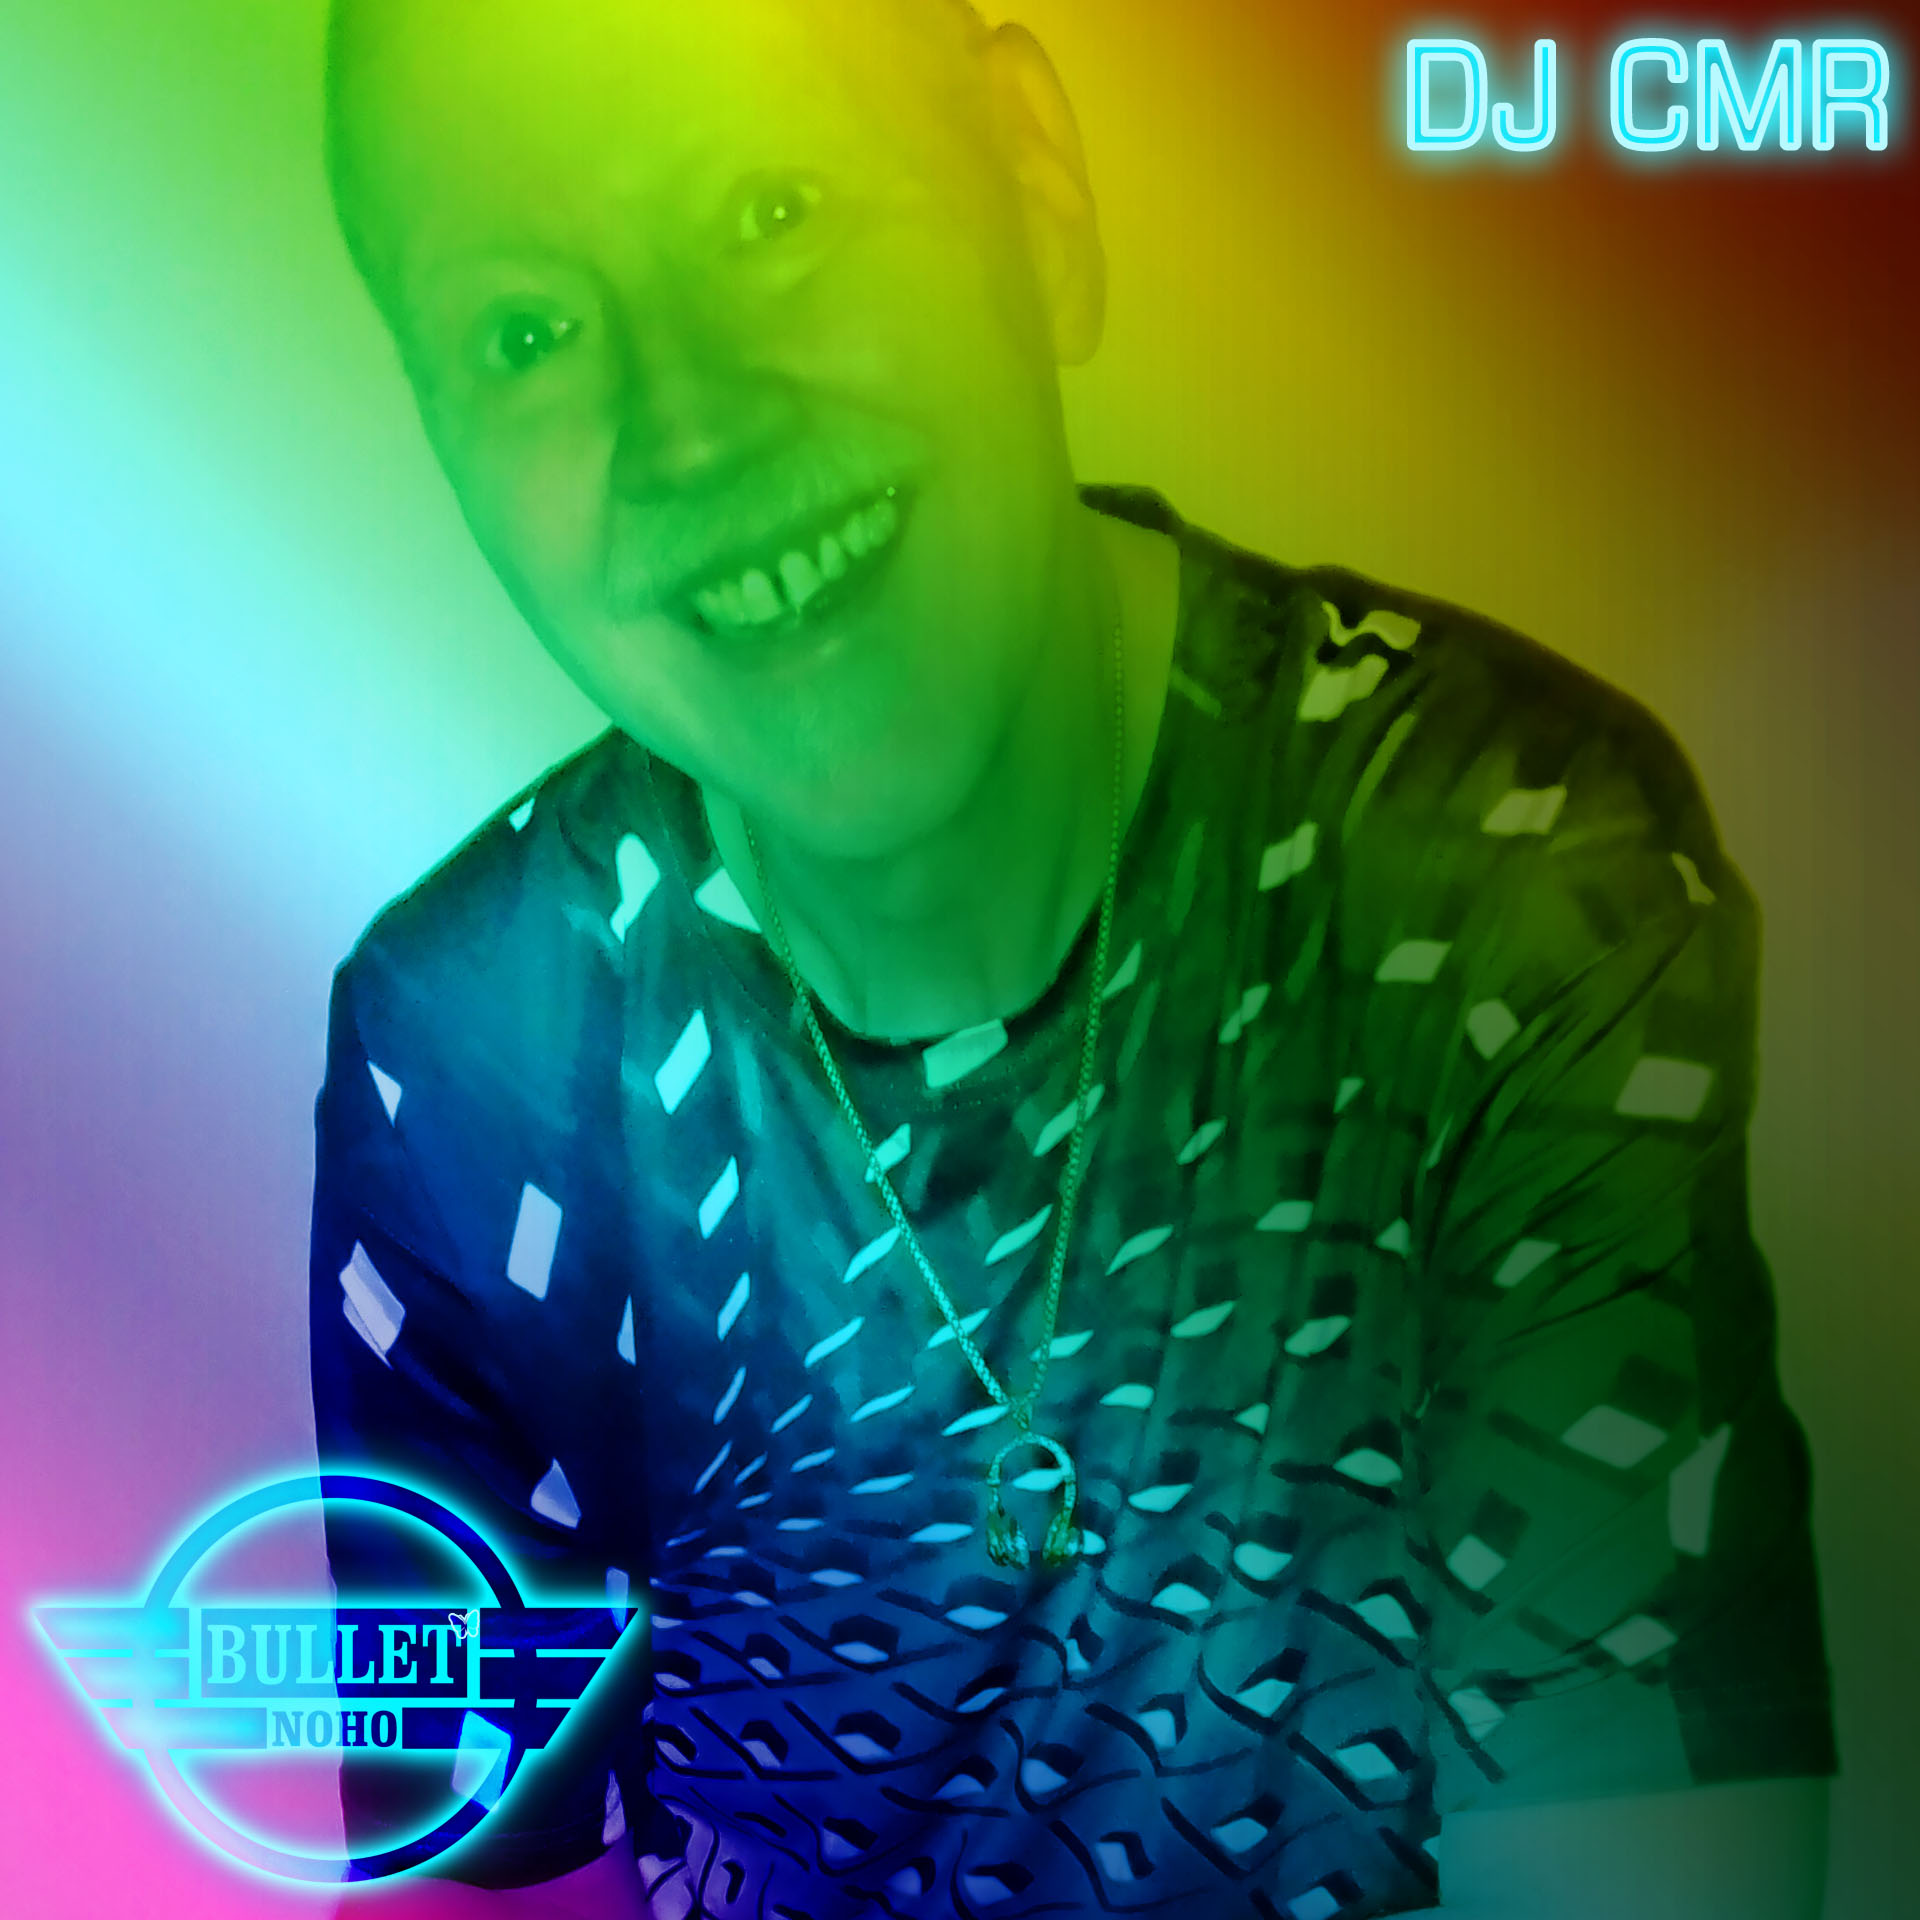 DJ CMR: Sunday, 04/07/24 from 3:00 PM to 8:00 PM